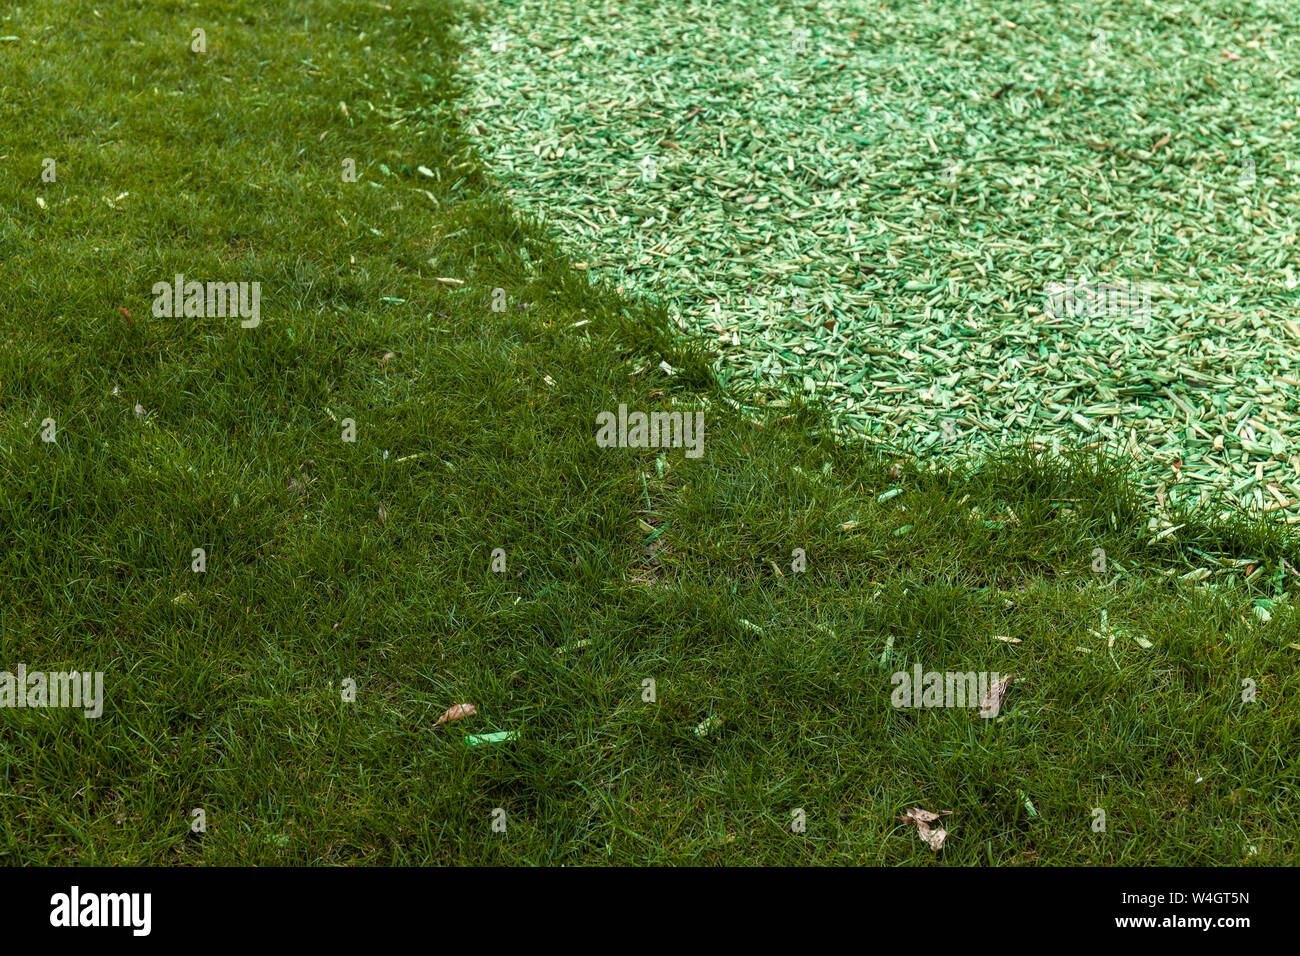 Grass and green wood shavings Stock Photo